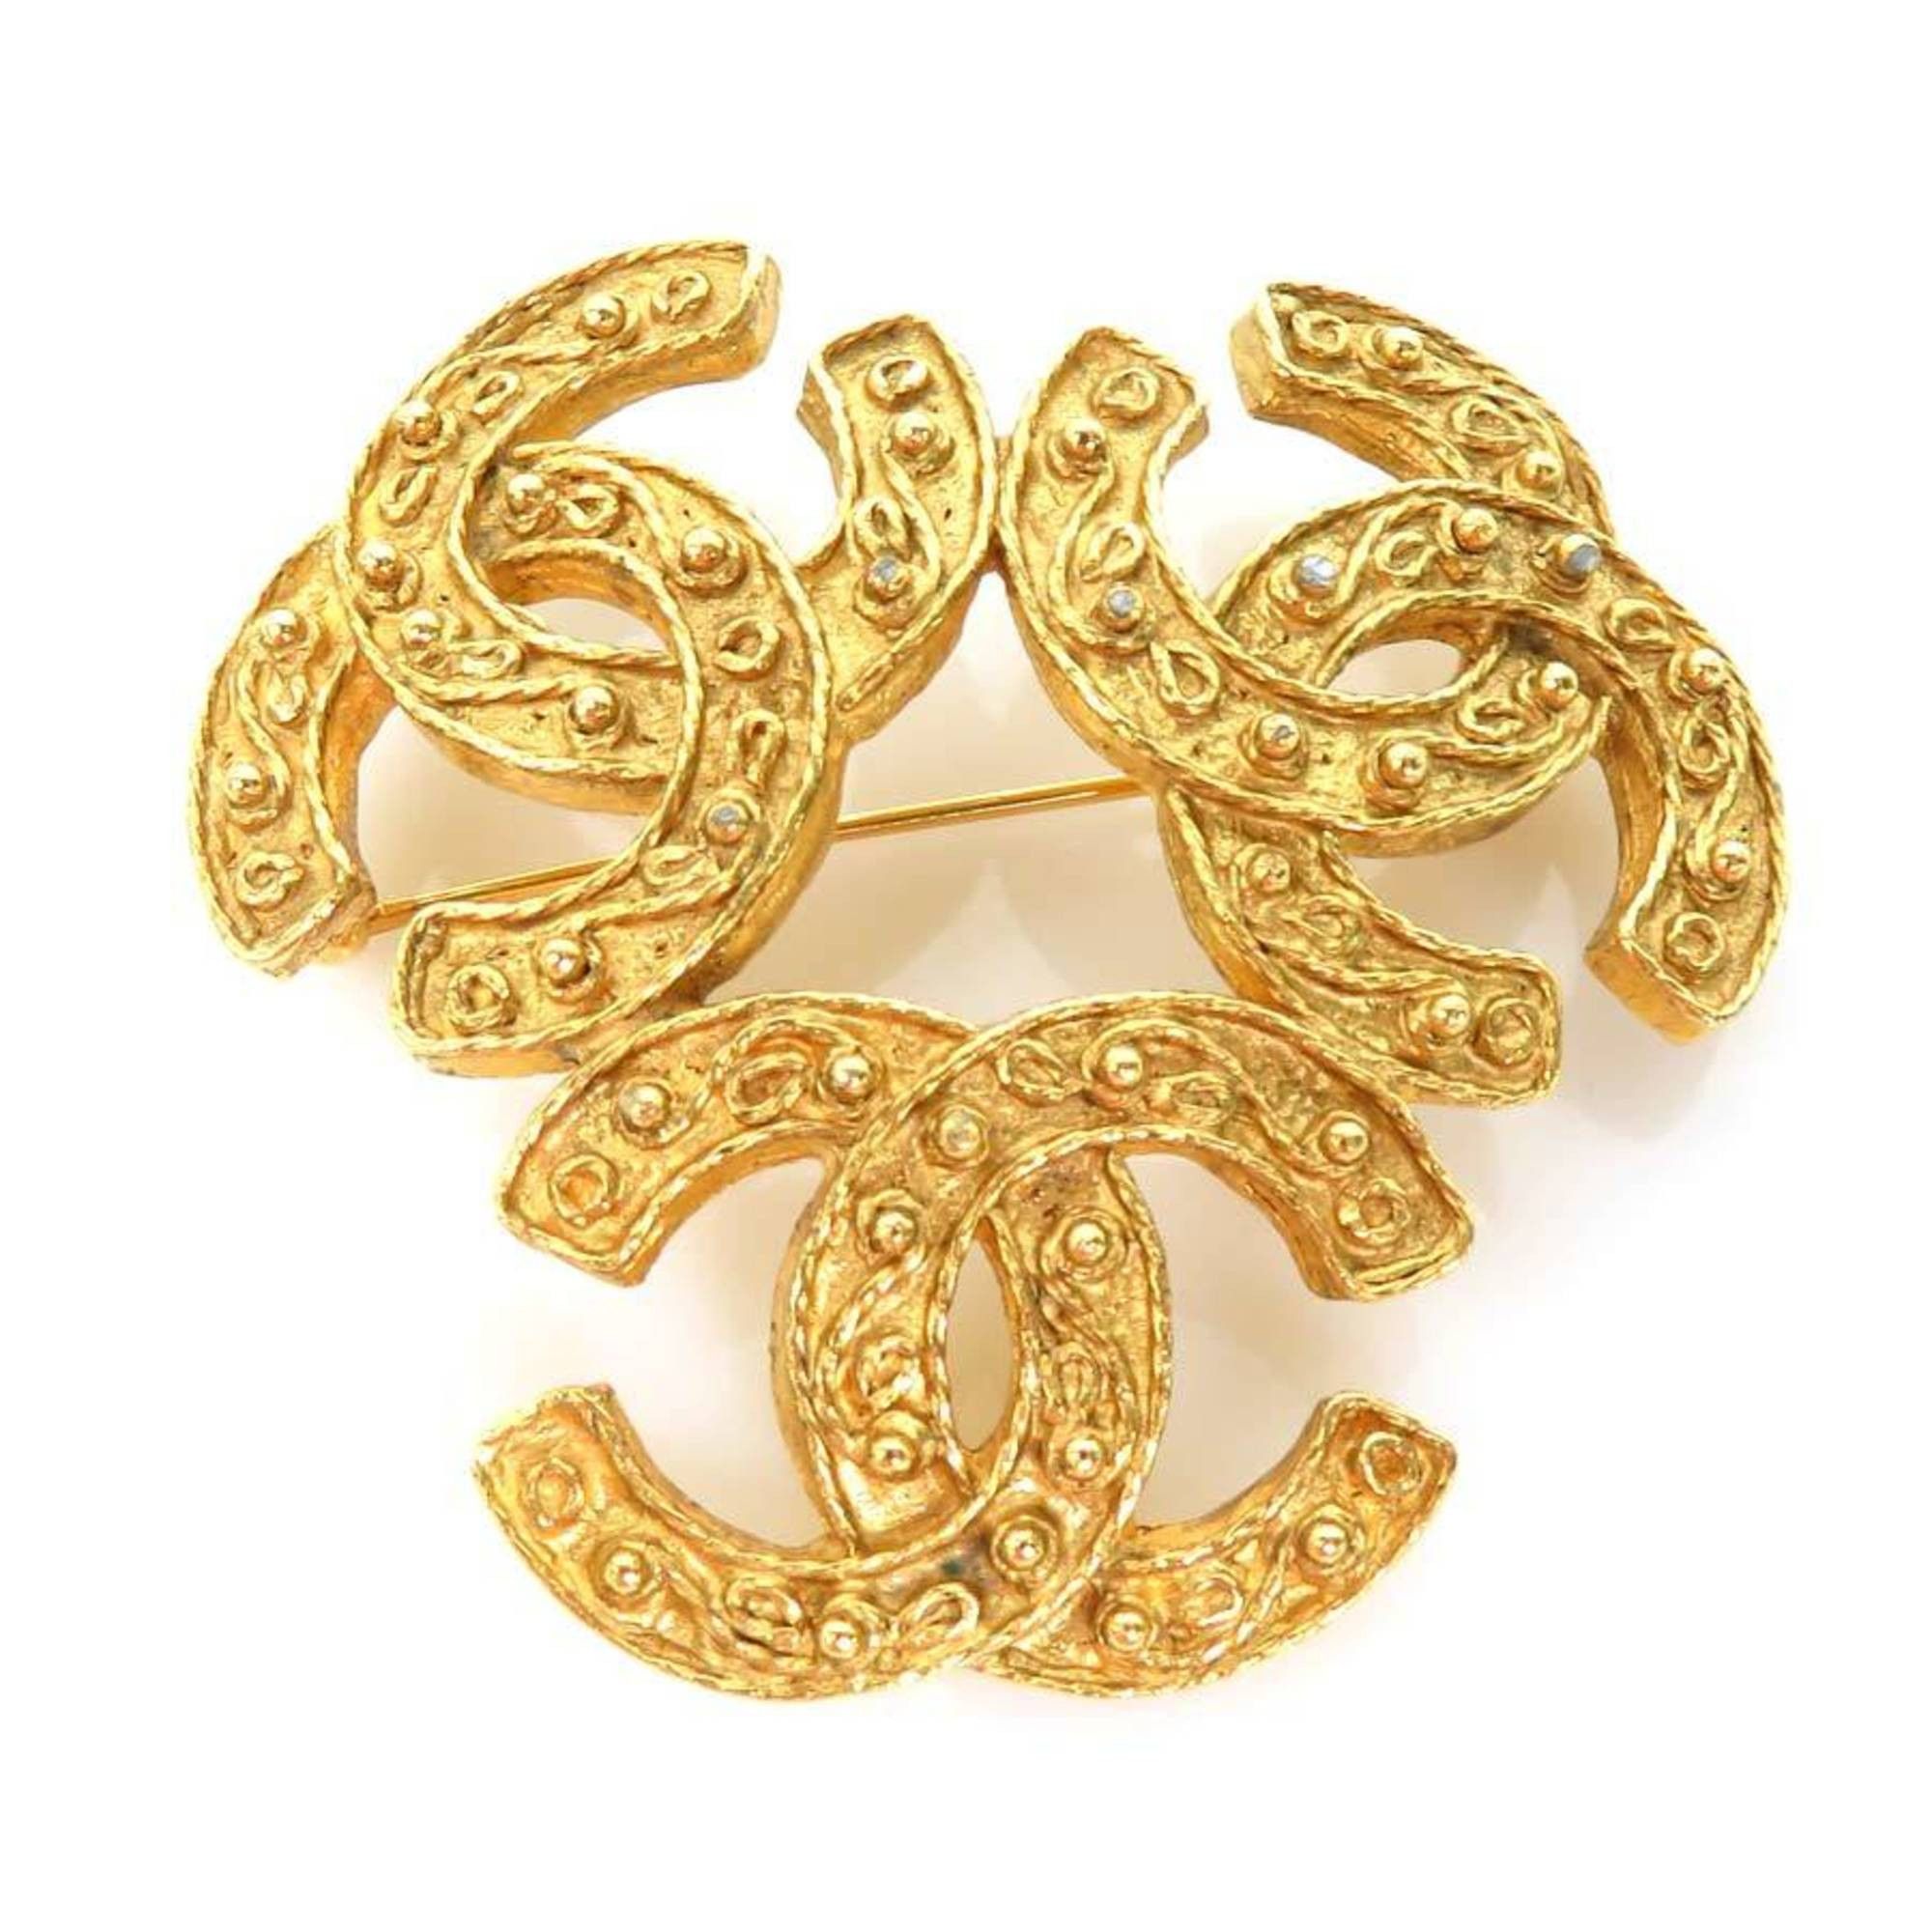 Authenticated Used CHANEL brooch pin here mark rhinestone gold 